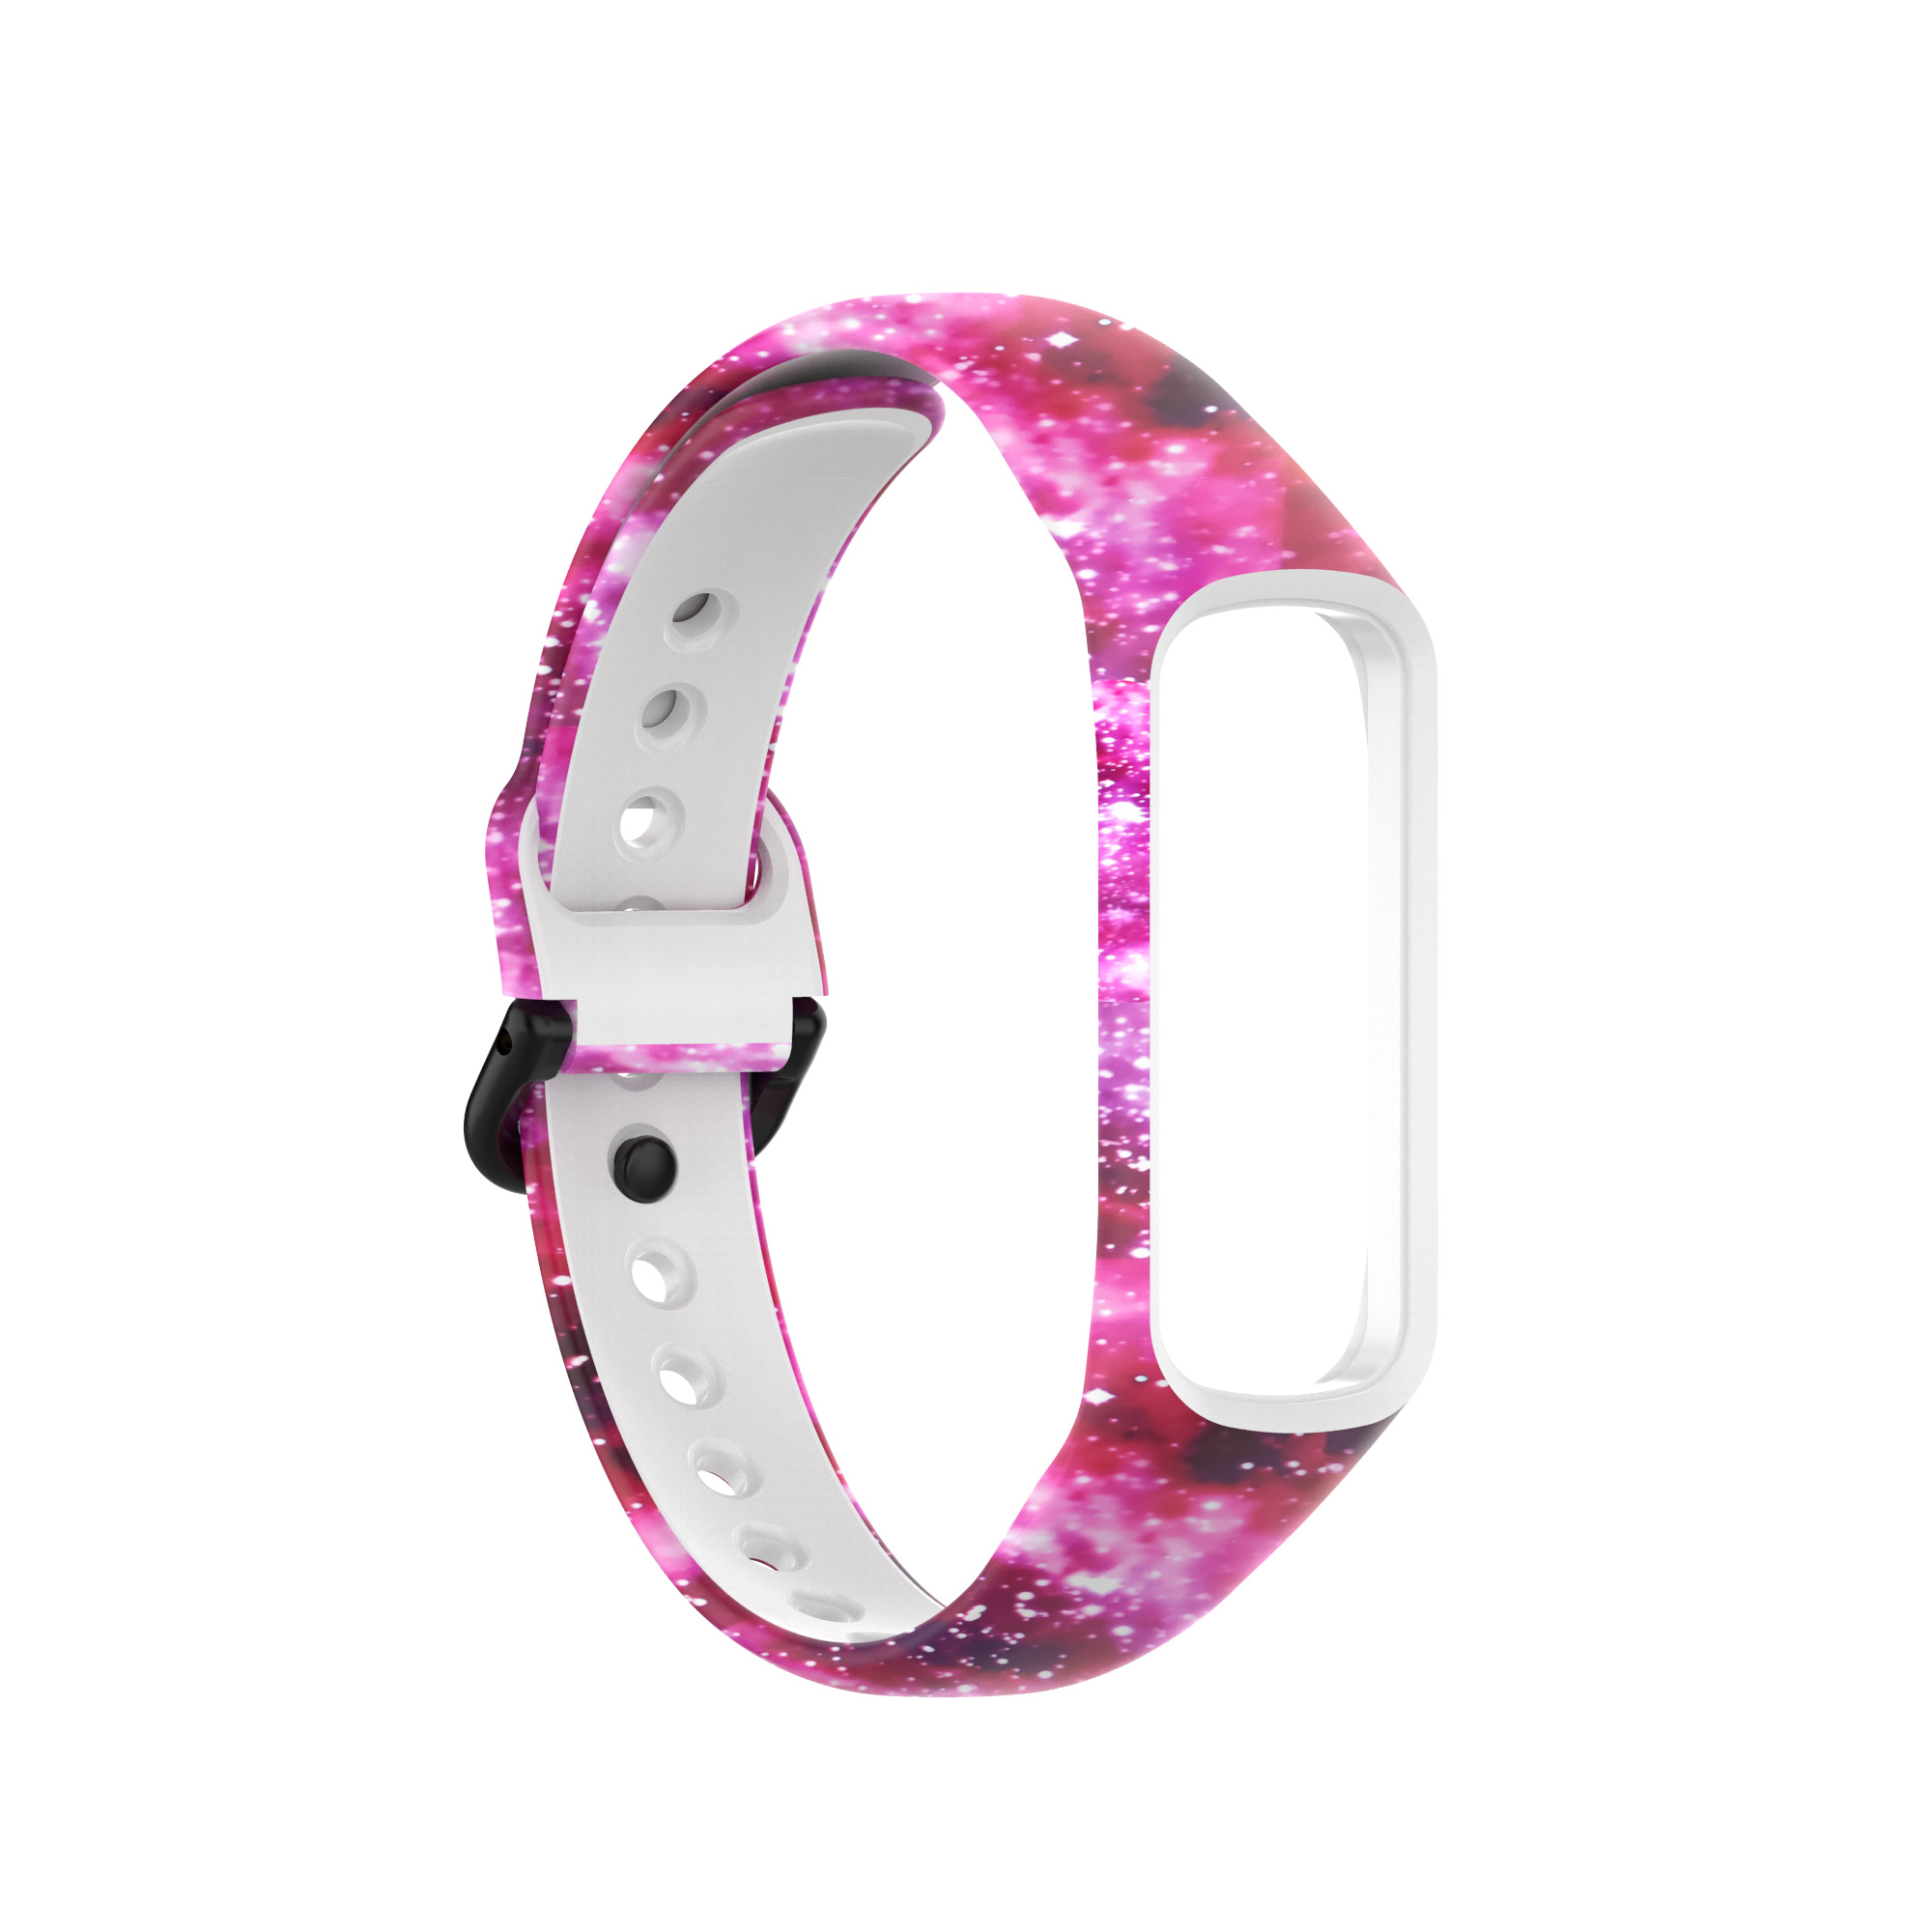 Bakeey-Printed-Pattern-Stainless-Steel-Buckle-Smart-watch-Band-Replacement-Strap-For-Samsung-Galaxy--1806217-30